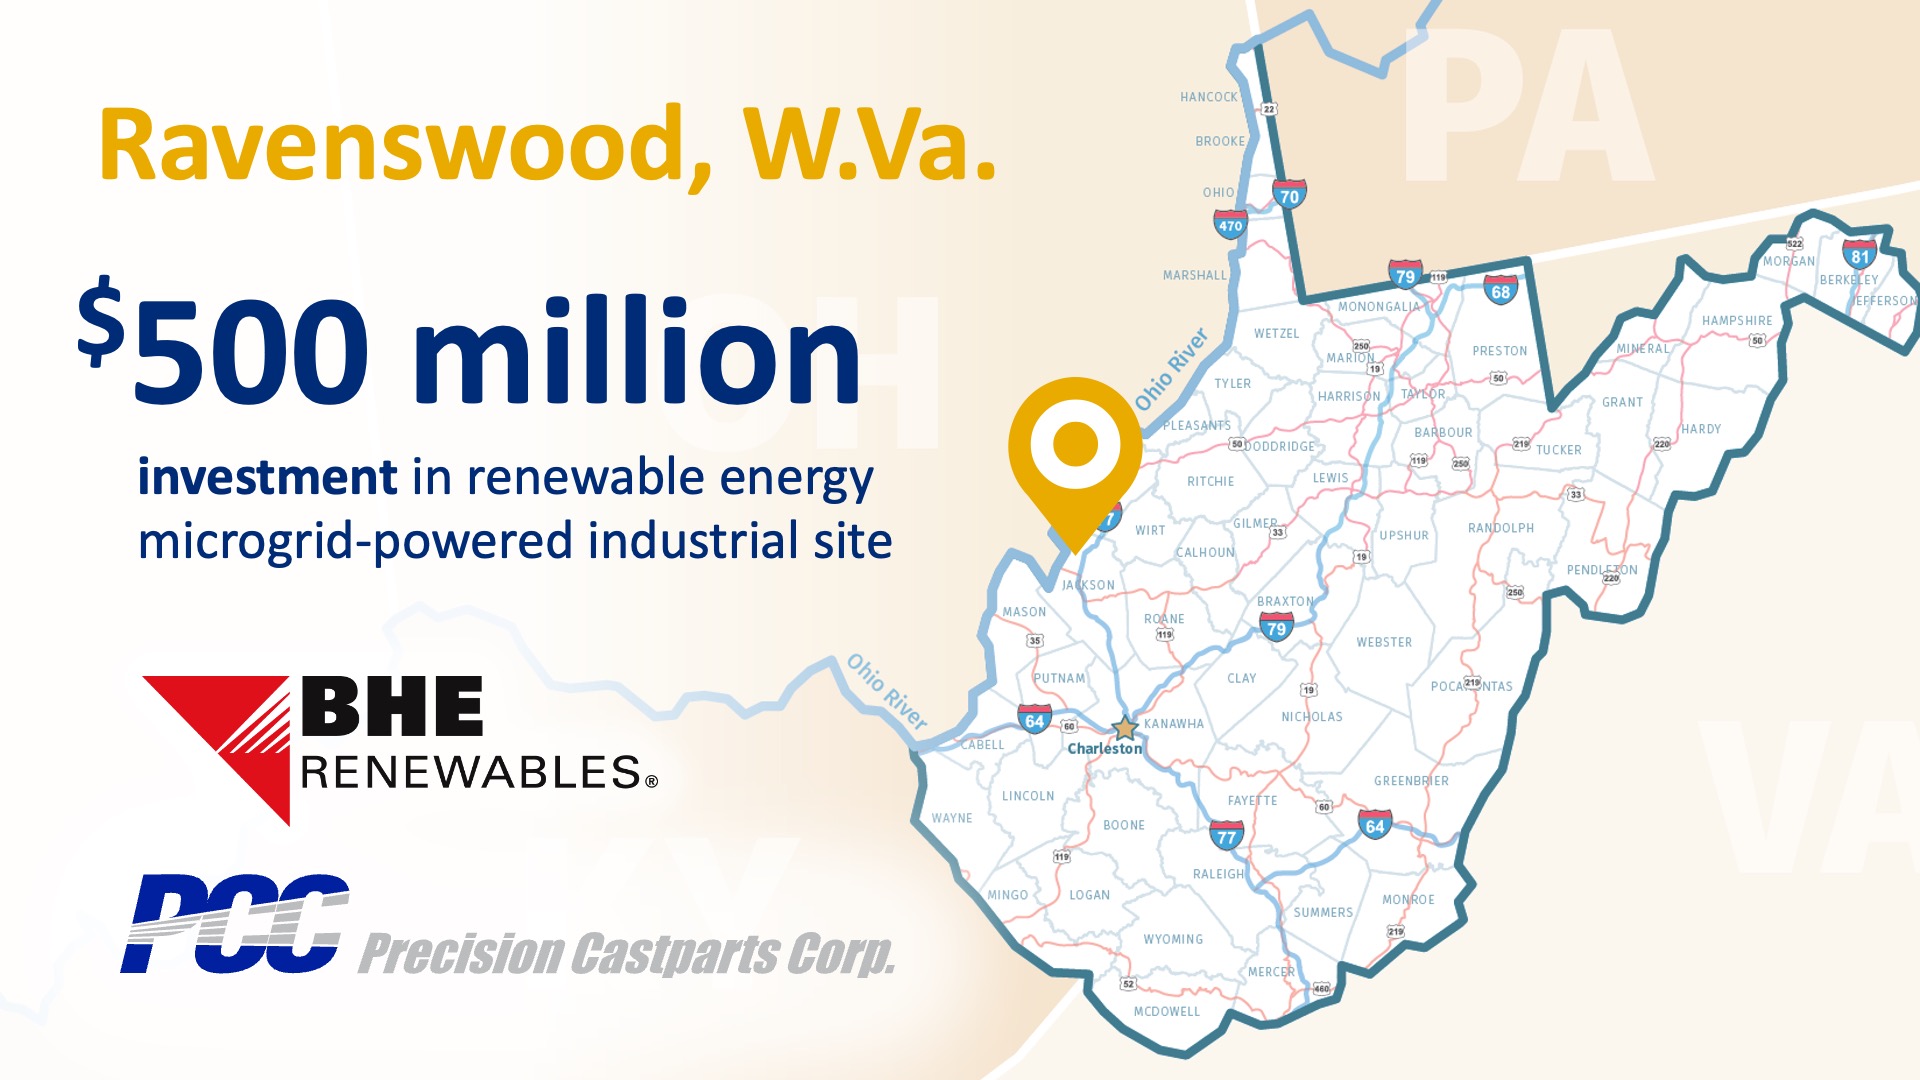 BHE Renewables and WV announce 0m investment to build global aerospace manufacturing hub powered by renewable energy microgrid